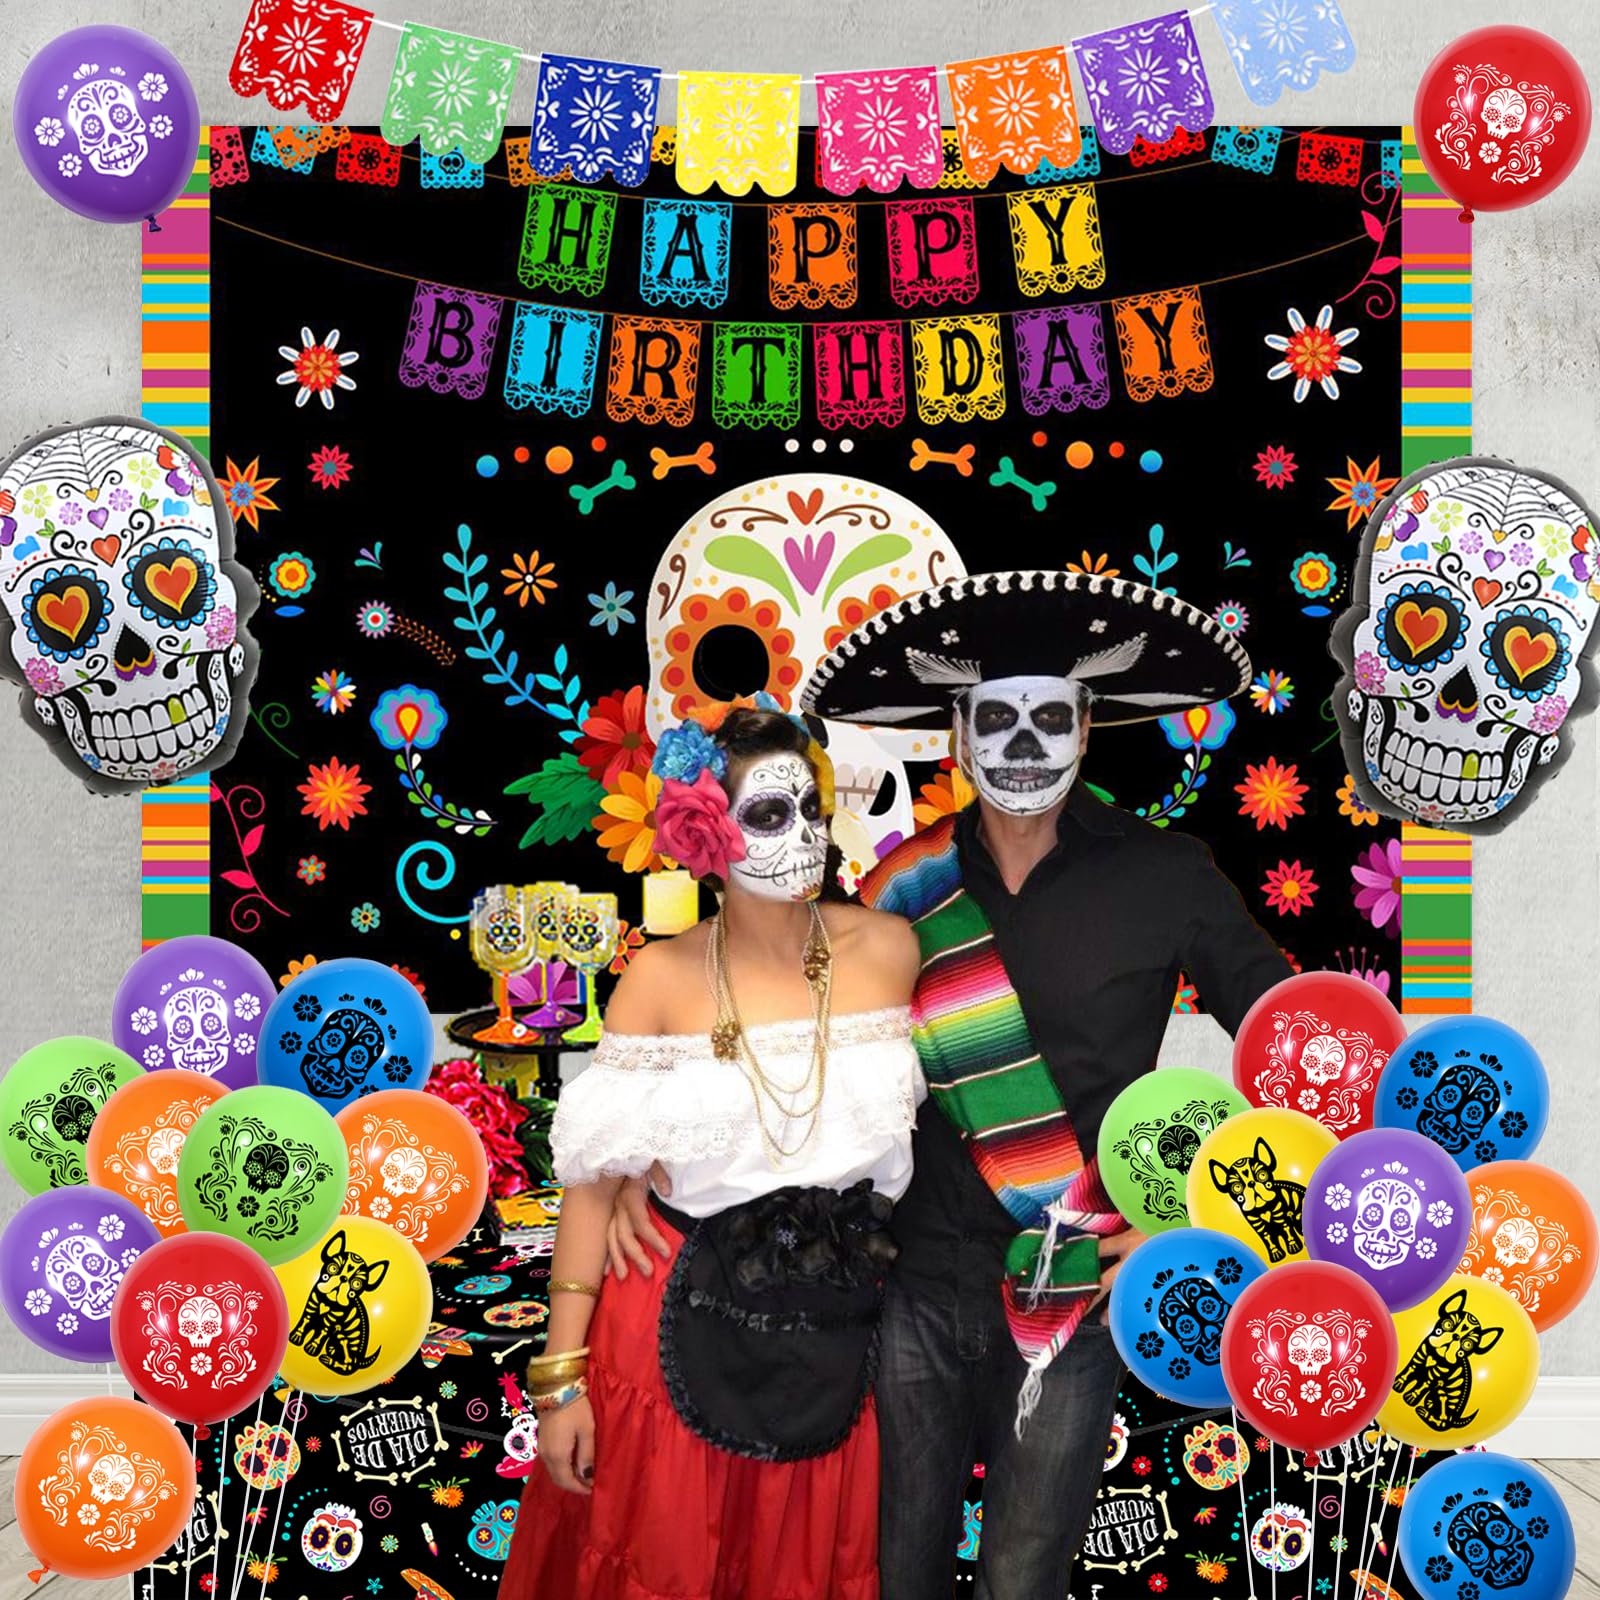 Fangleland Day of The Dead Theme Birthday Party Decorations for Boy Girl - Dia De Los Muertos Bday Celebration Party Supplies Balloons Banner Tablecloth Sugar Skull Mexican Backdrop